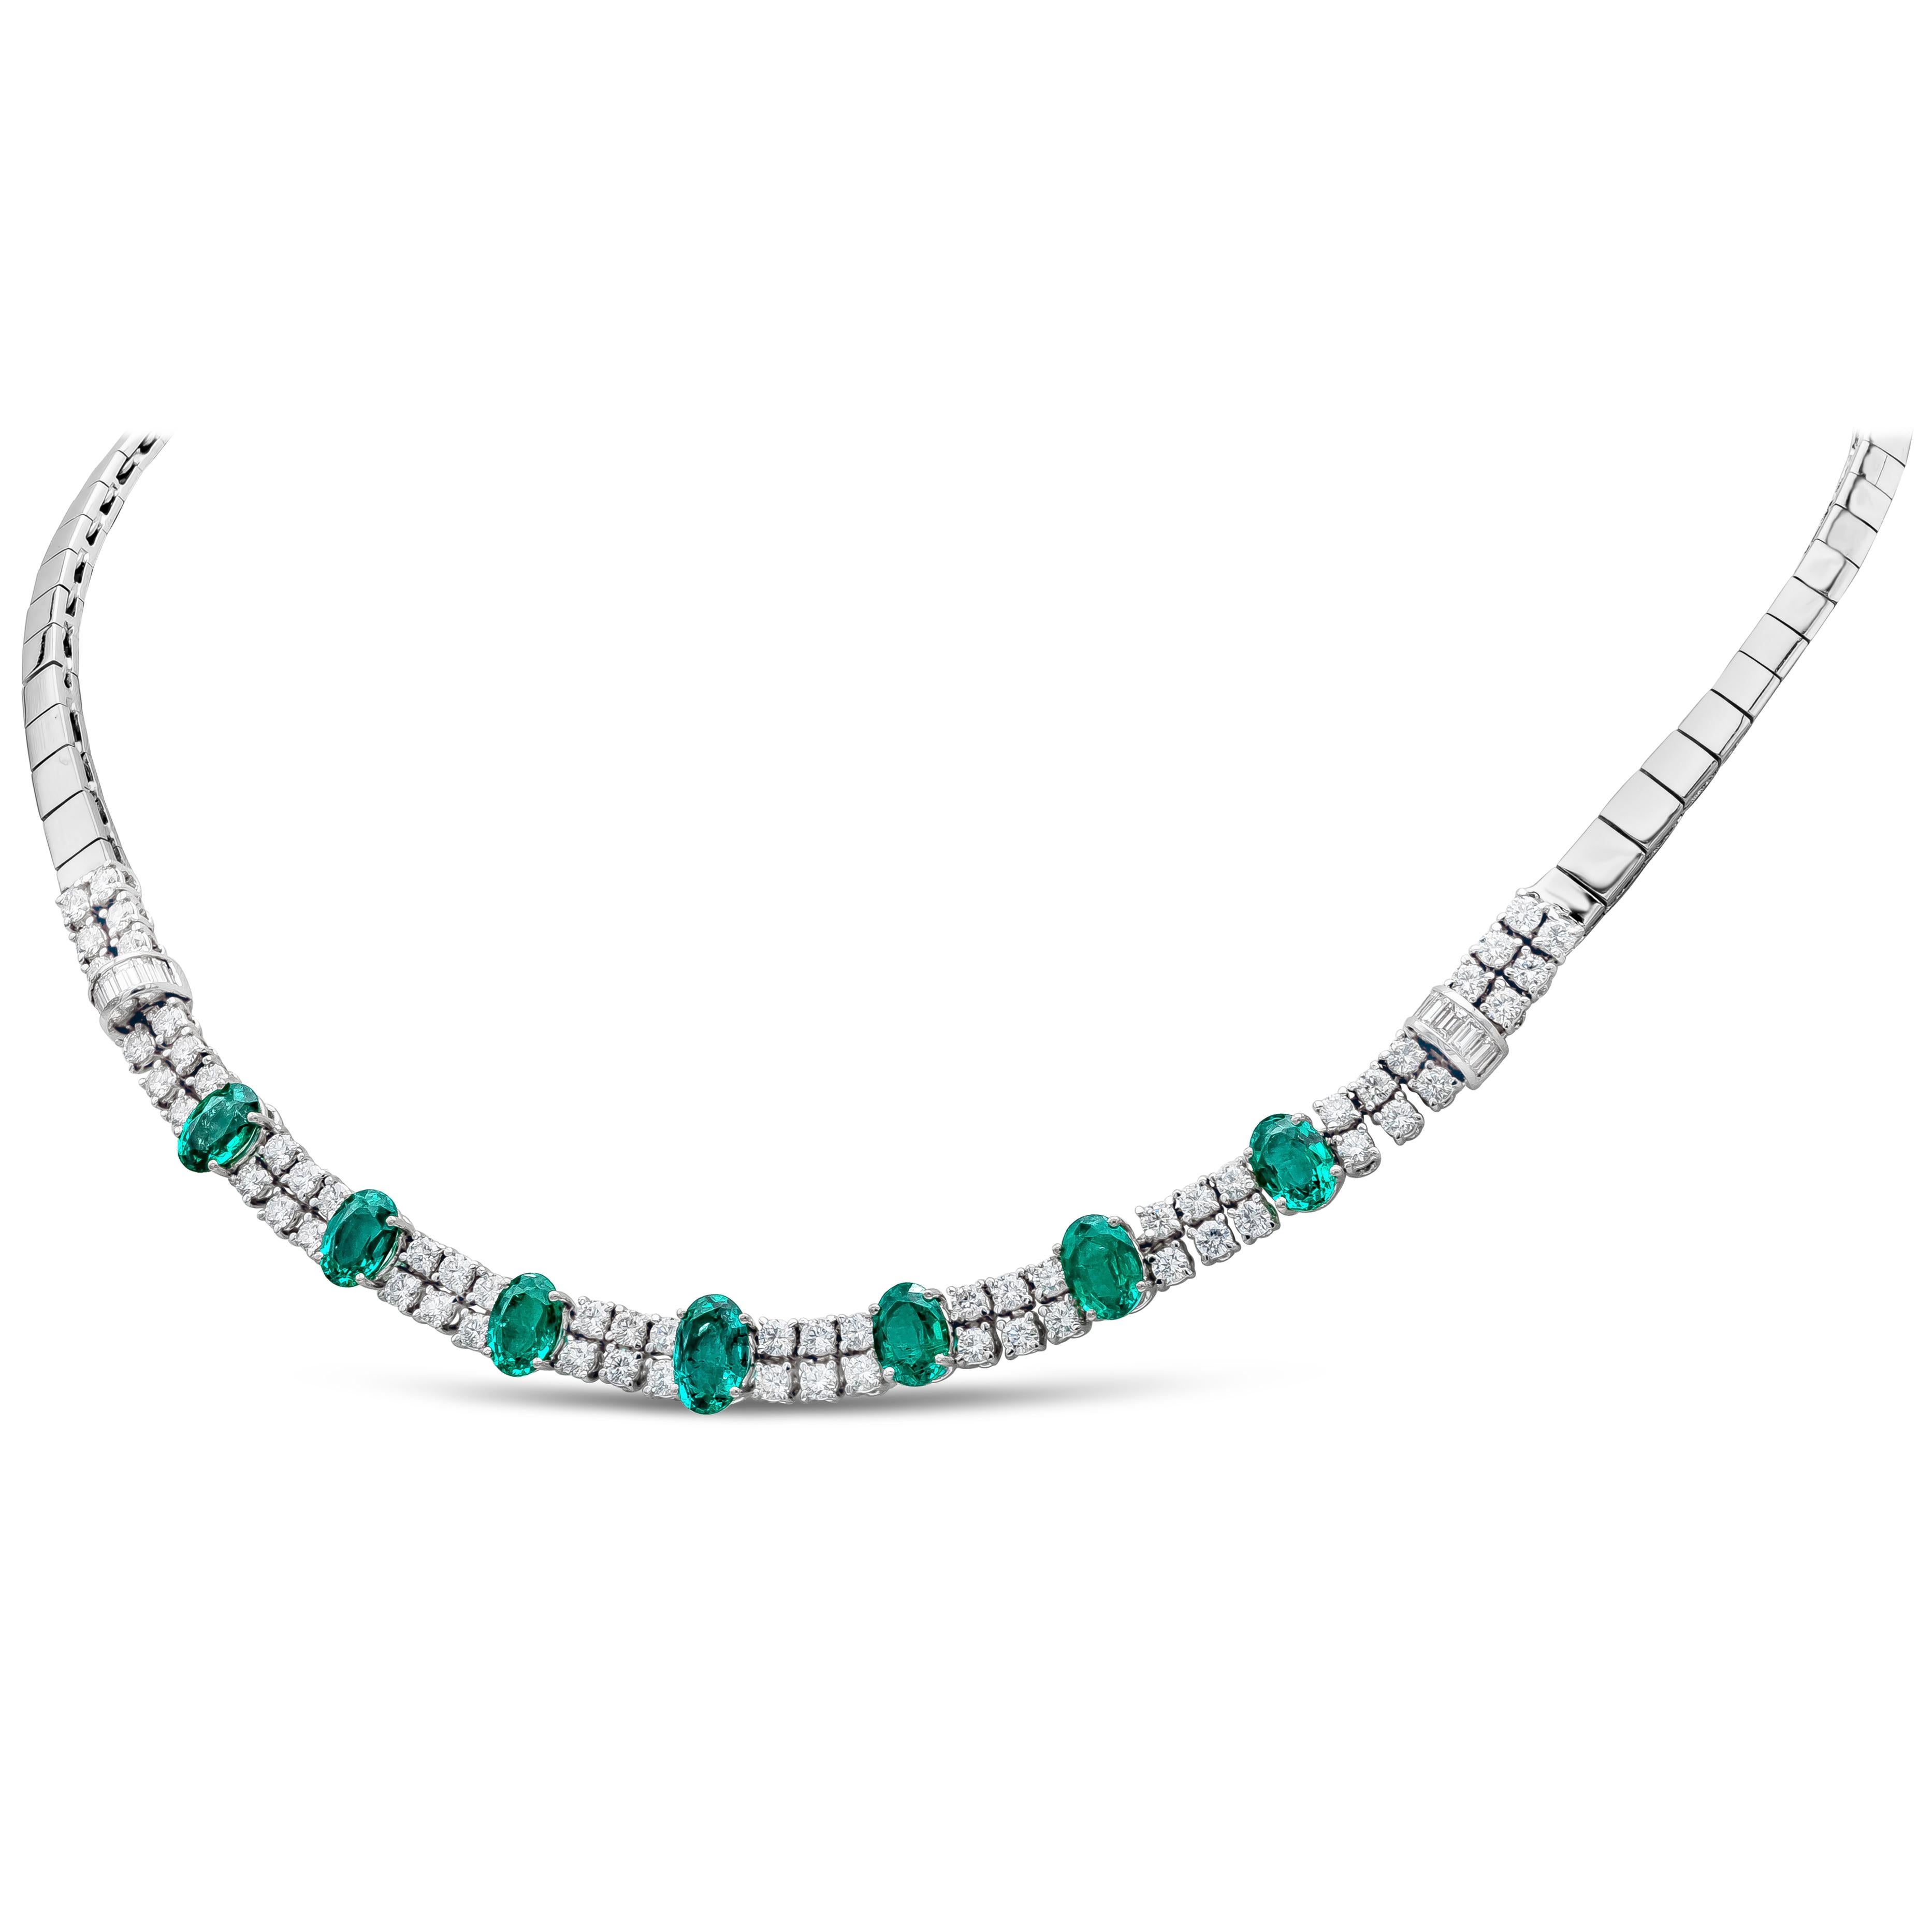 Fashionable necklace set with 7 natural green emeralds weighing 5.66 carats. Each emerald is spaced with 2 rows of round brilliant diamonds, Baguette diamonds channel set in a circular design attached on each side of the necklace. Diamonds weighing